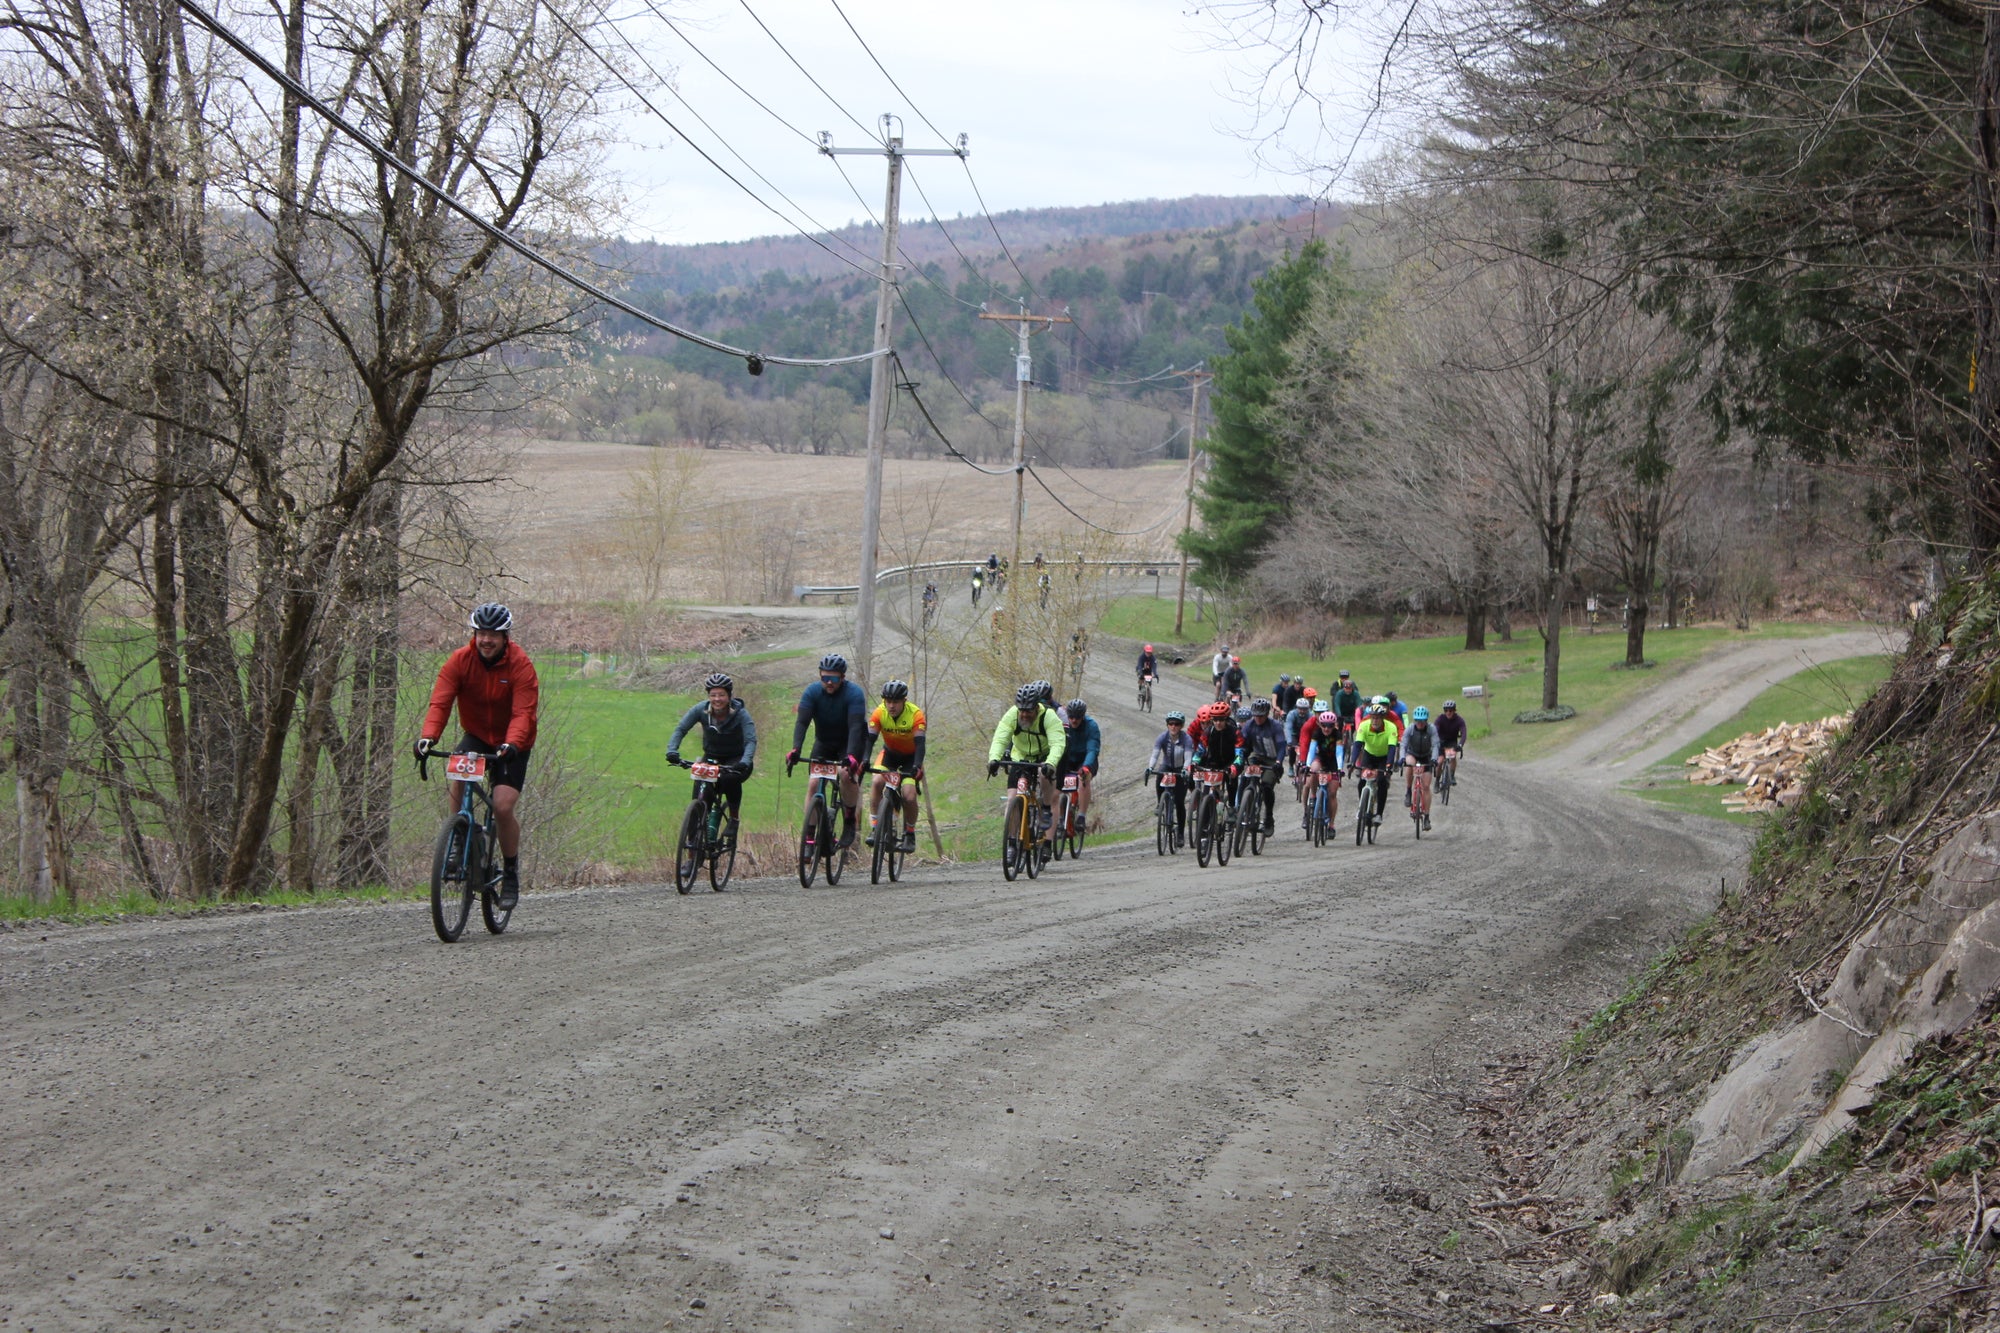 A large group of cyclists riding a dirt road